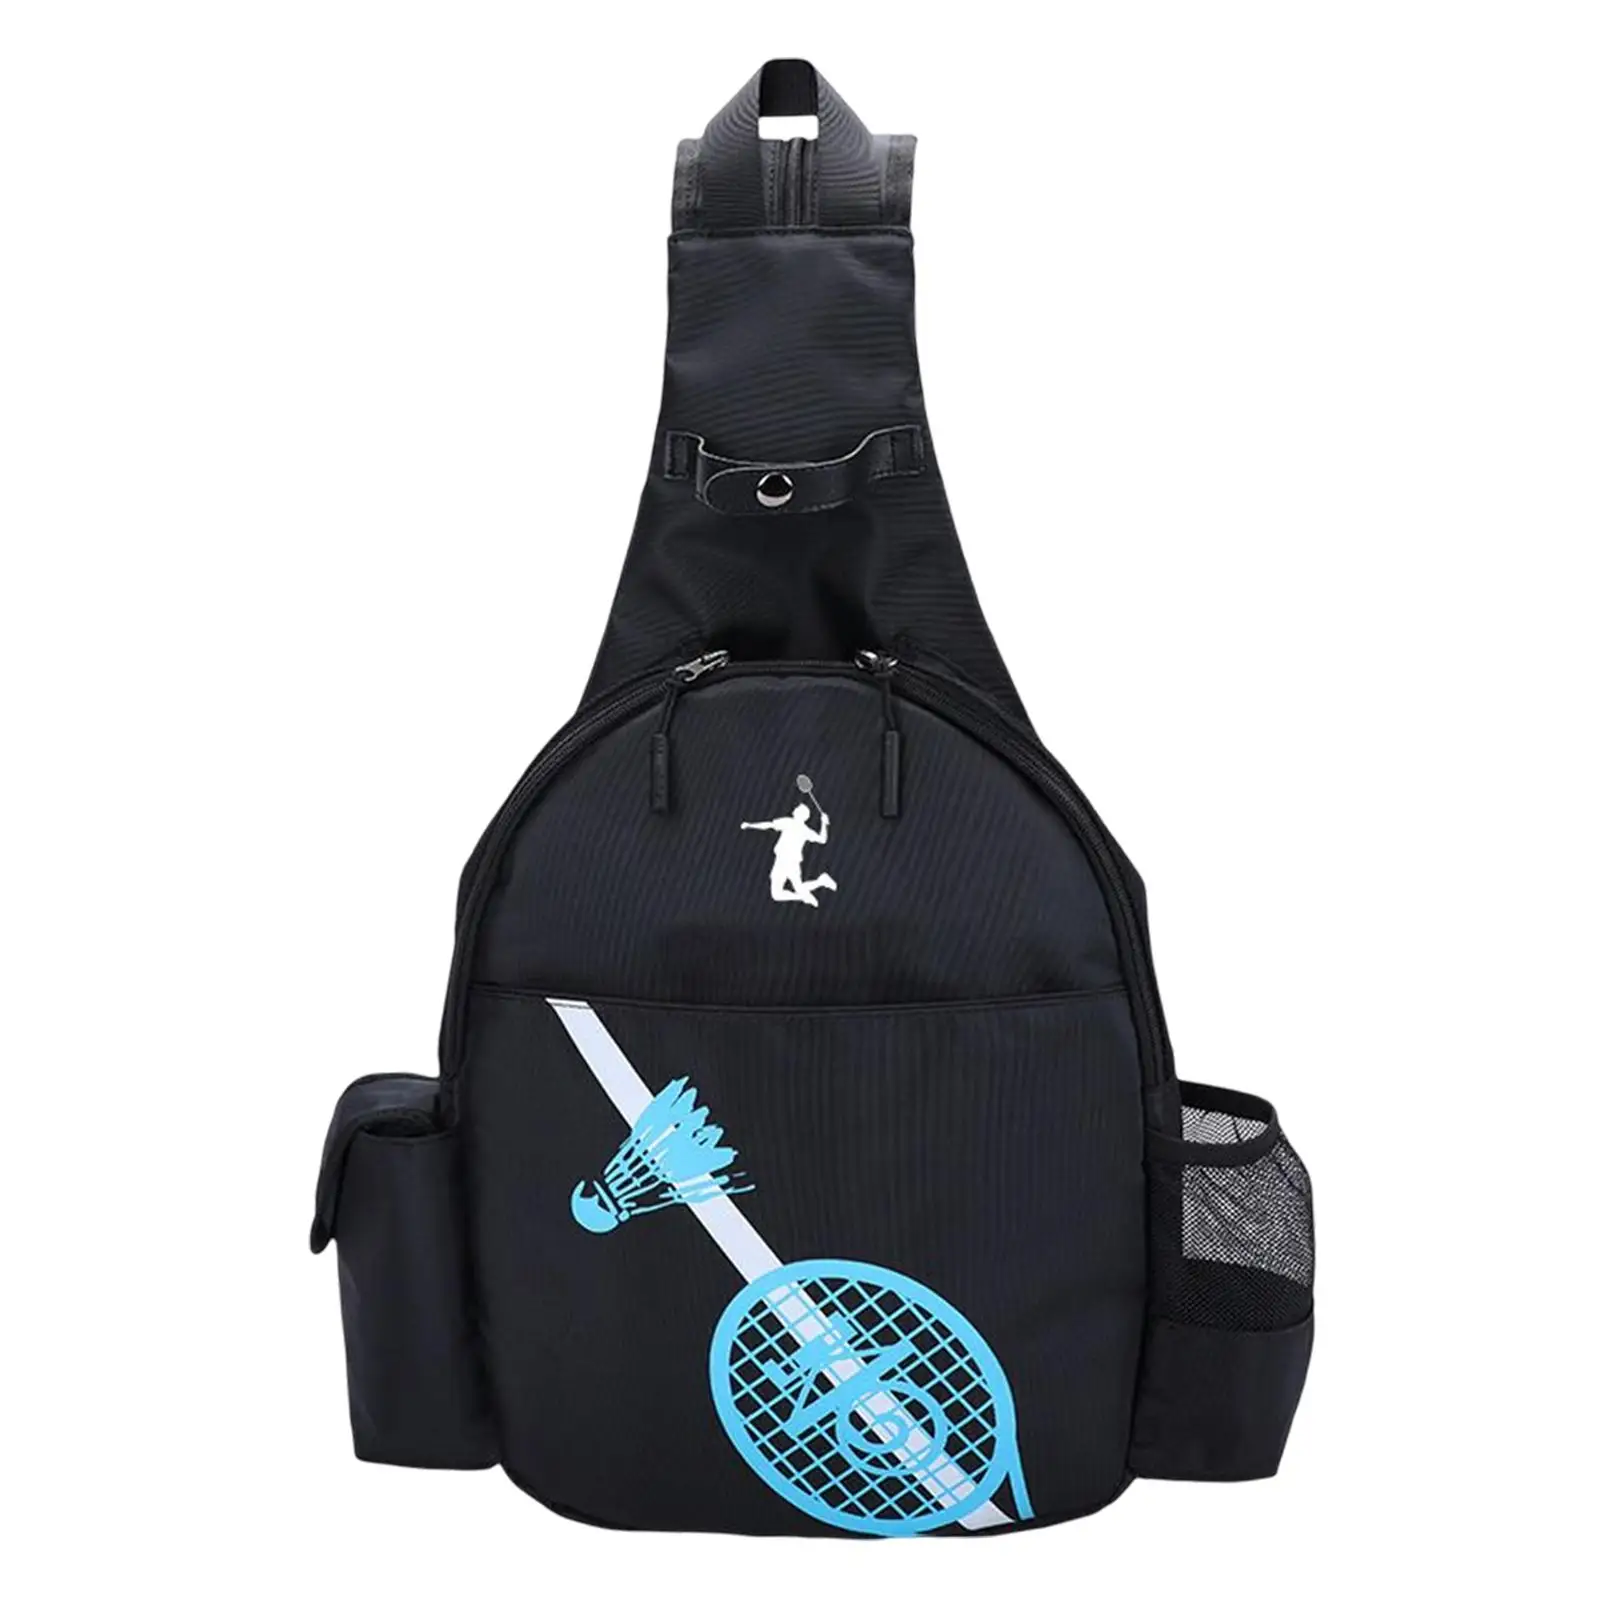 Tennis Racket Backpack for Squash Racquet Youth Adults Beginner Players